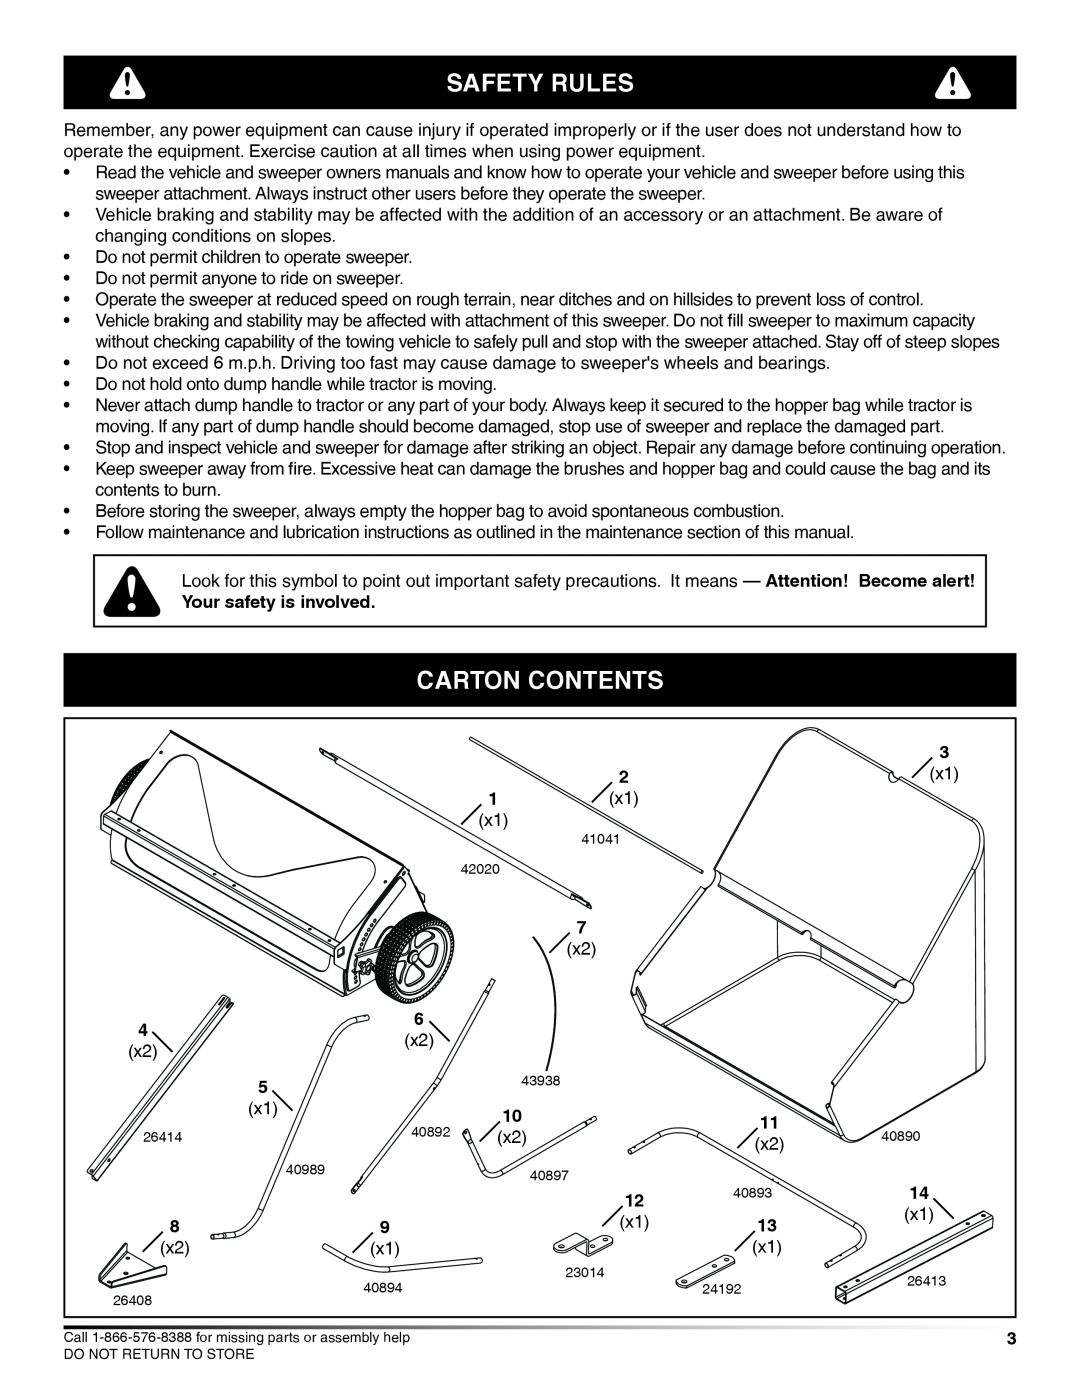 Craftsman 486.24229 manual safety rules, carton contents 